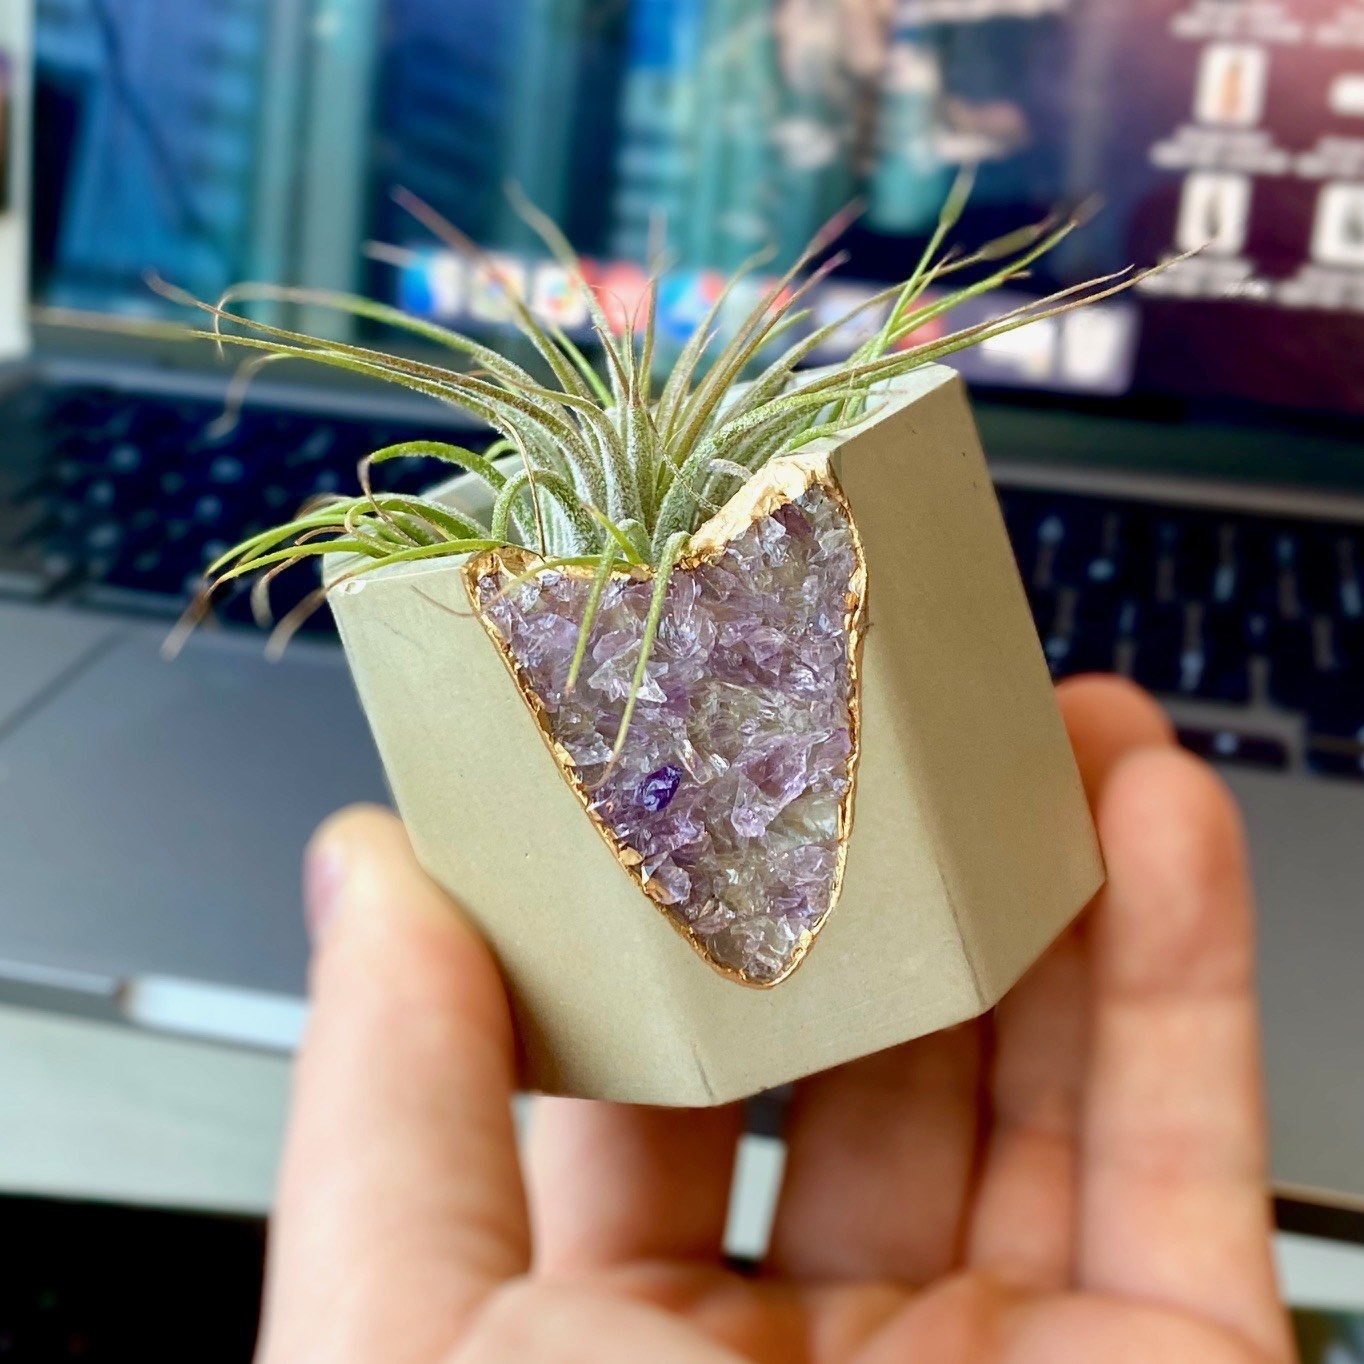 BuzzFeed writer&#x27;s image of amethyst geode vessel with air plant